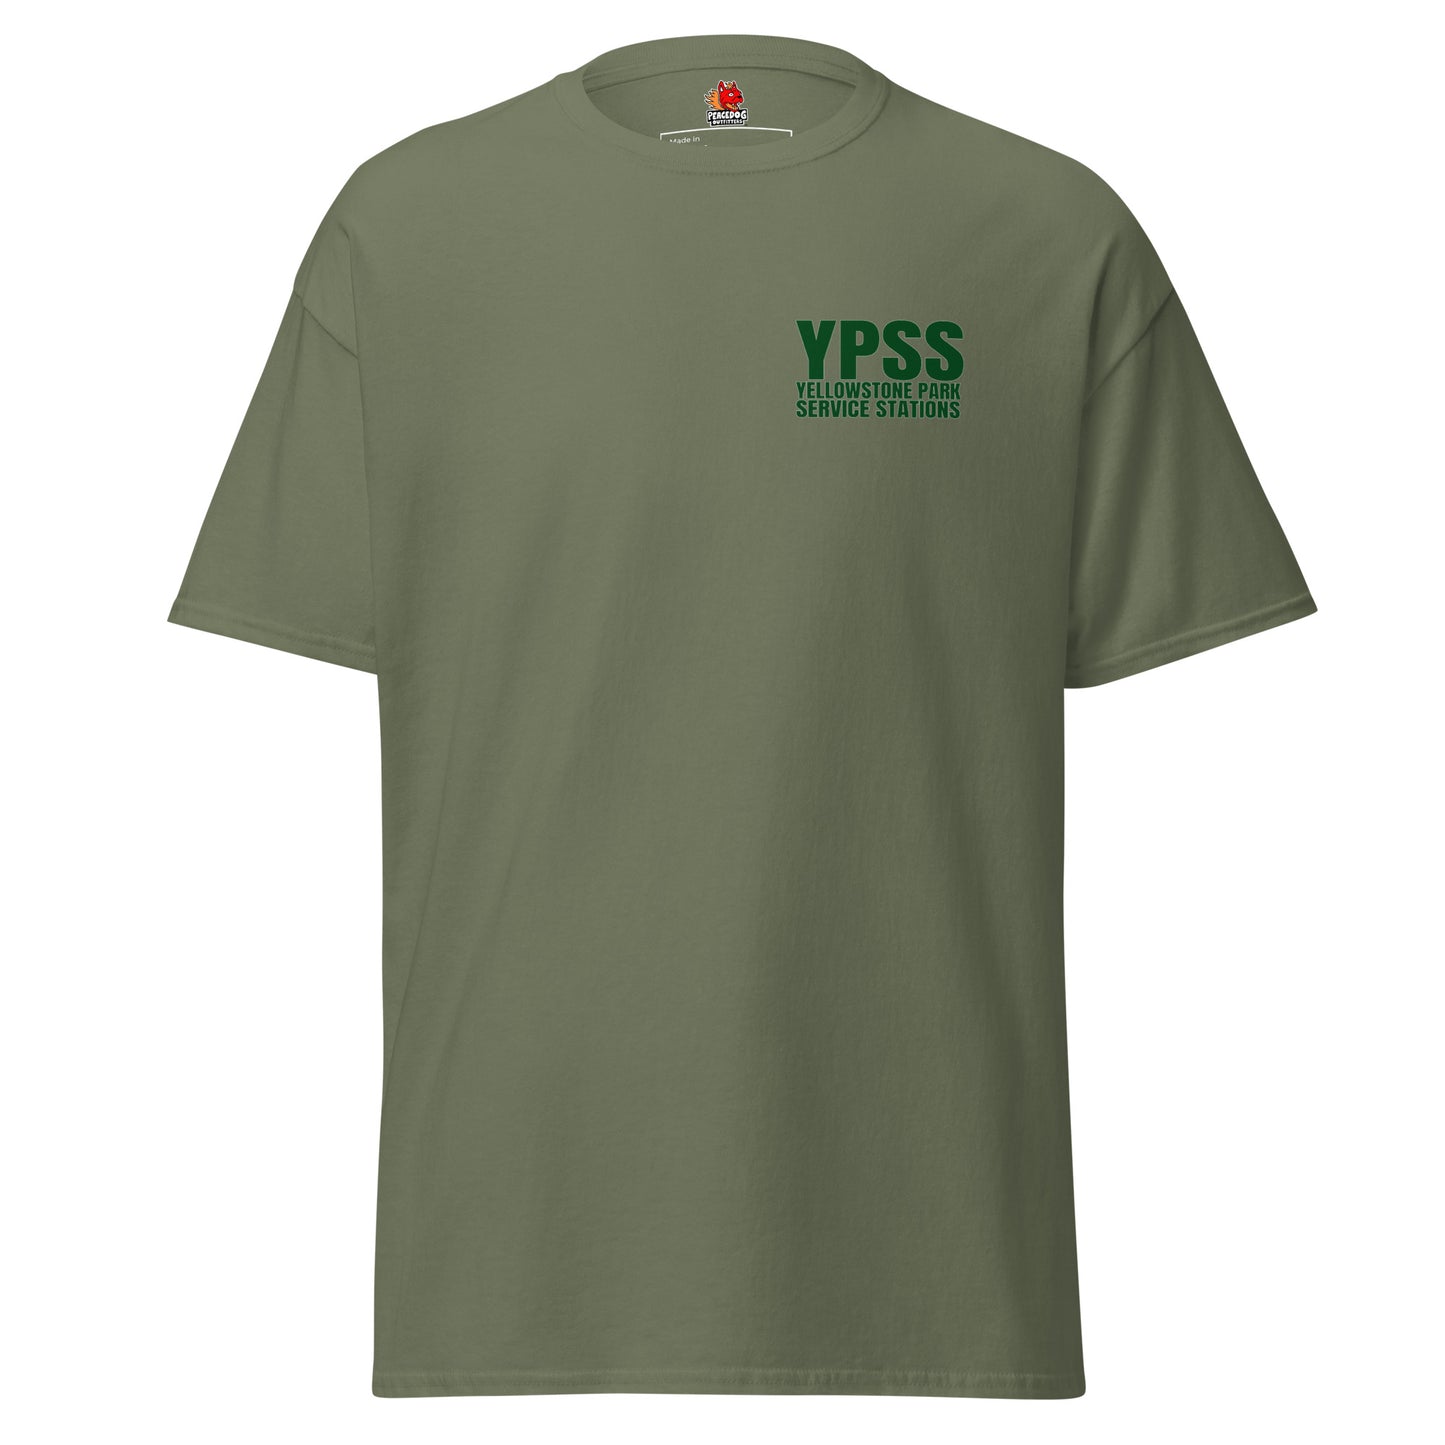 YPSS Yellowstone Park Service Stations - Lake Station - Classic Tee